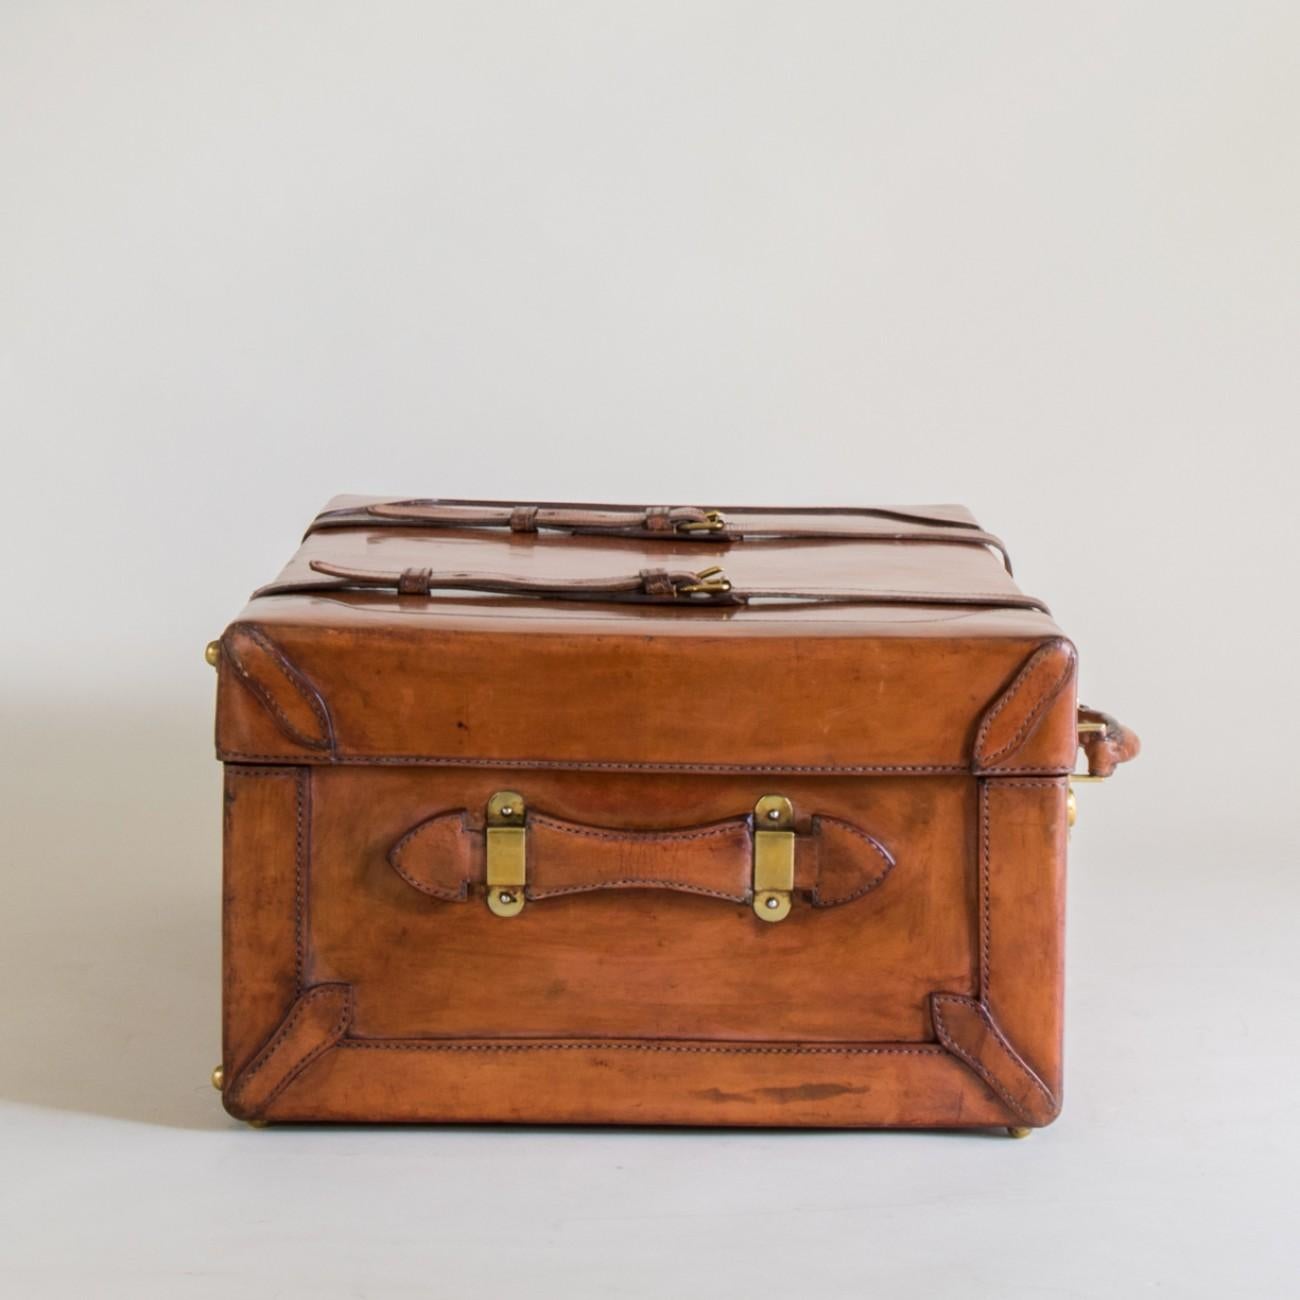 European Large Tan Leather Suitcase with Straps and Tray, circa 1930